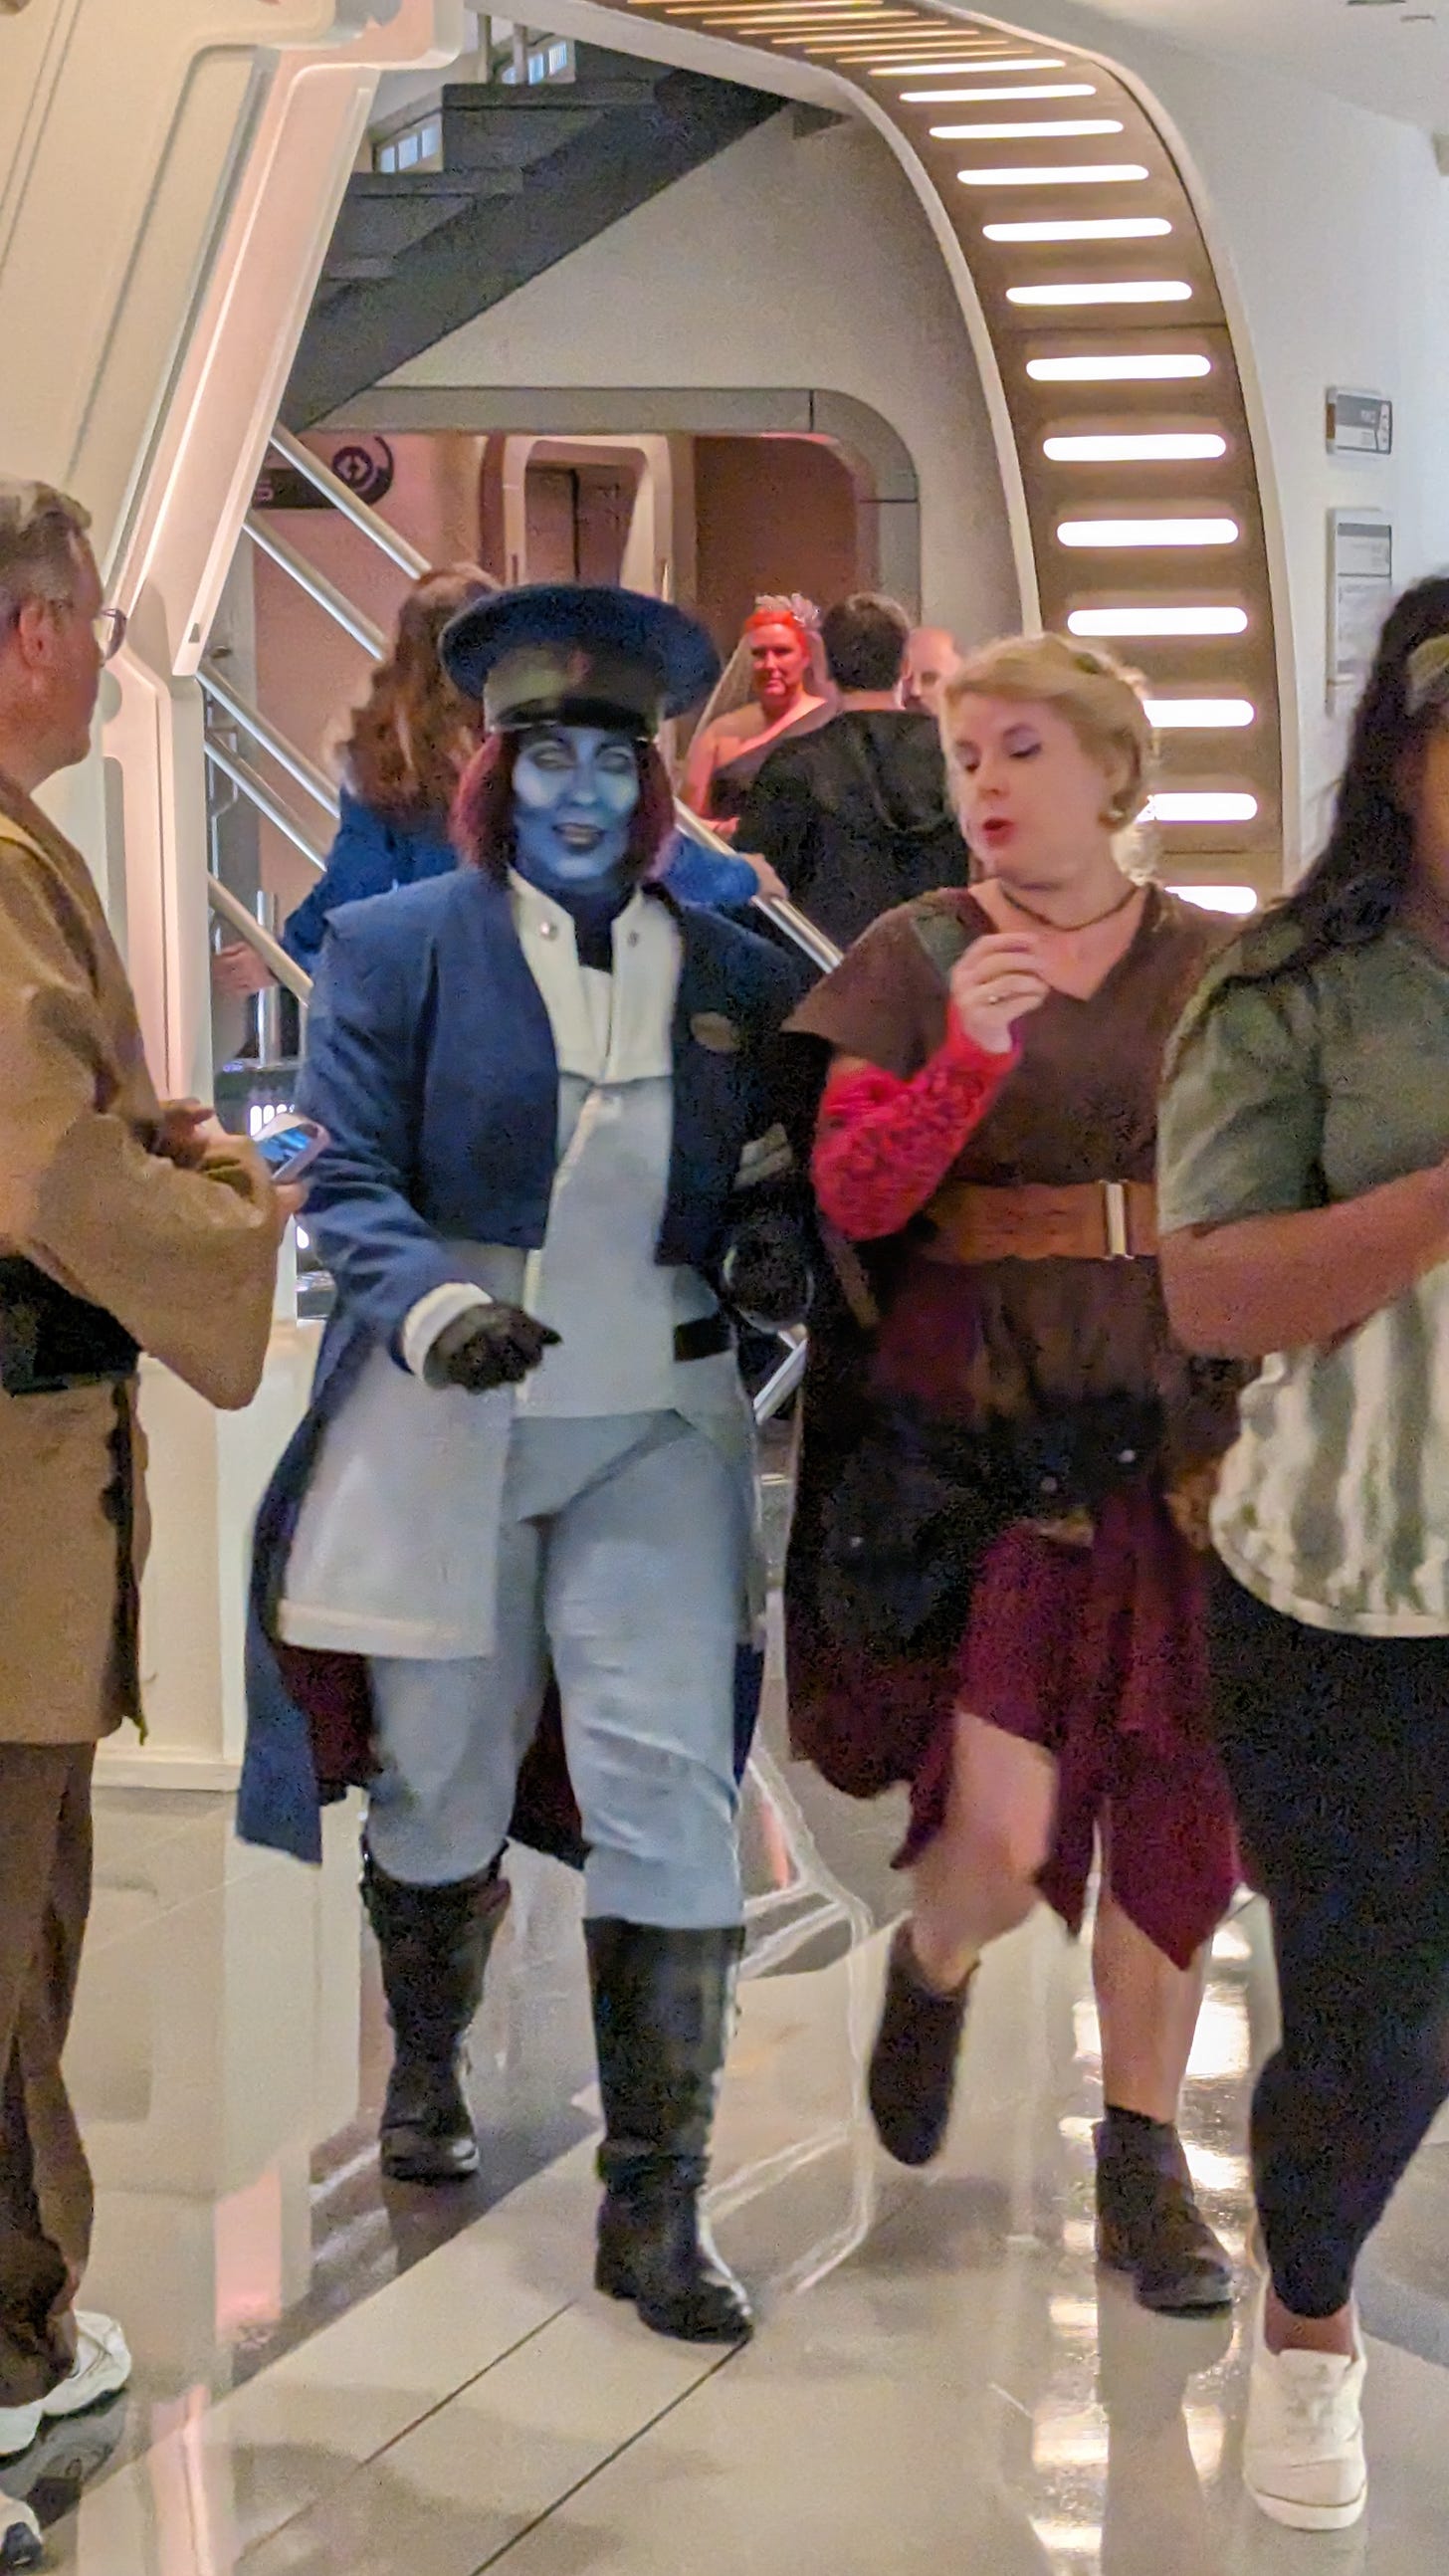 Cass and Captain Keevan crossing the Atrium amid a crowd